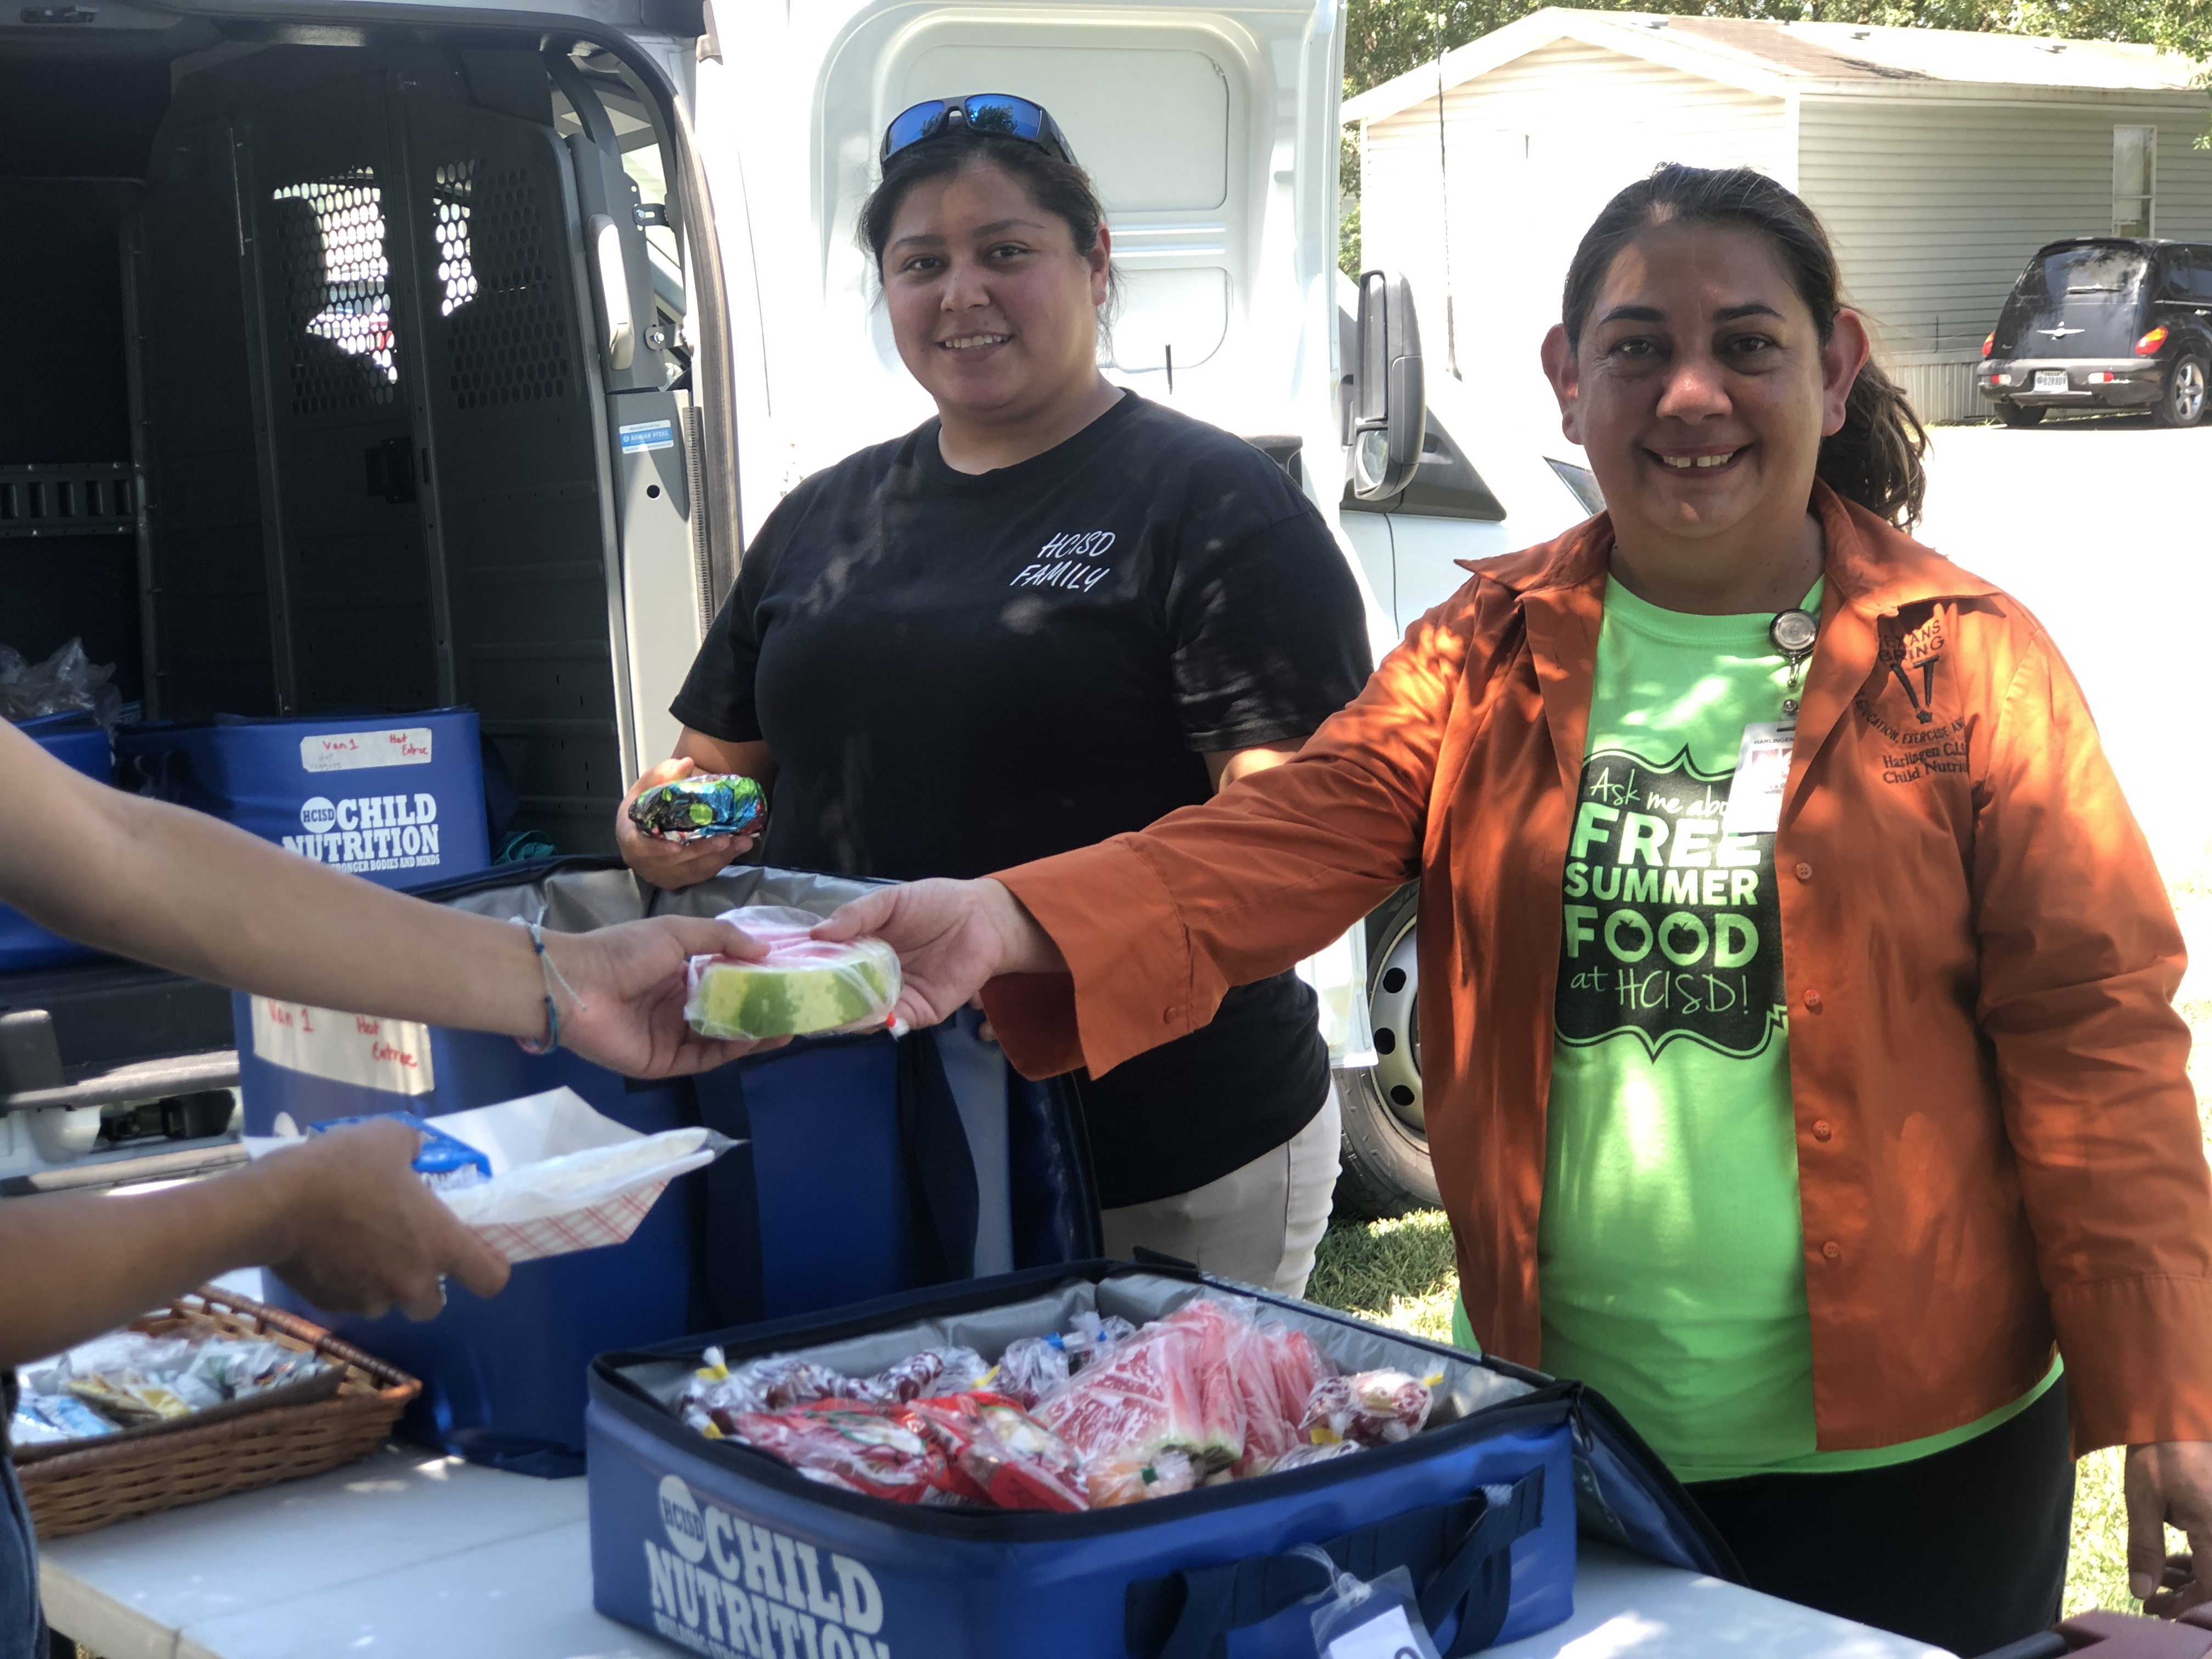 HCISD Child Nutrition provides free summer meals for all children